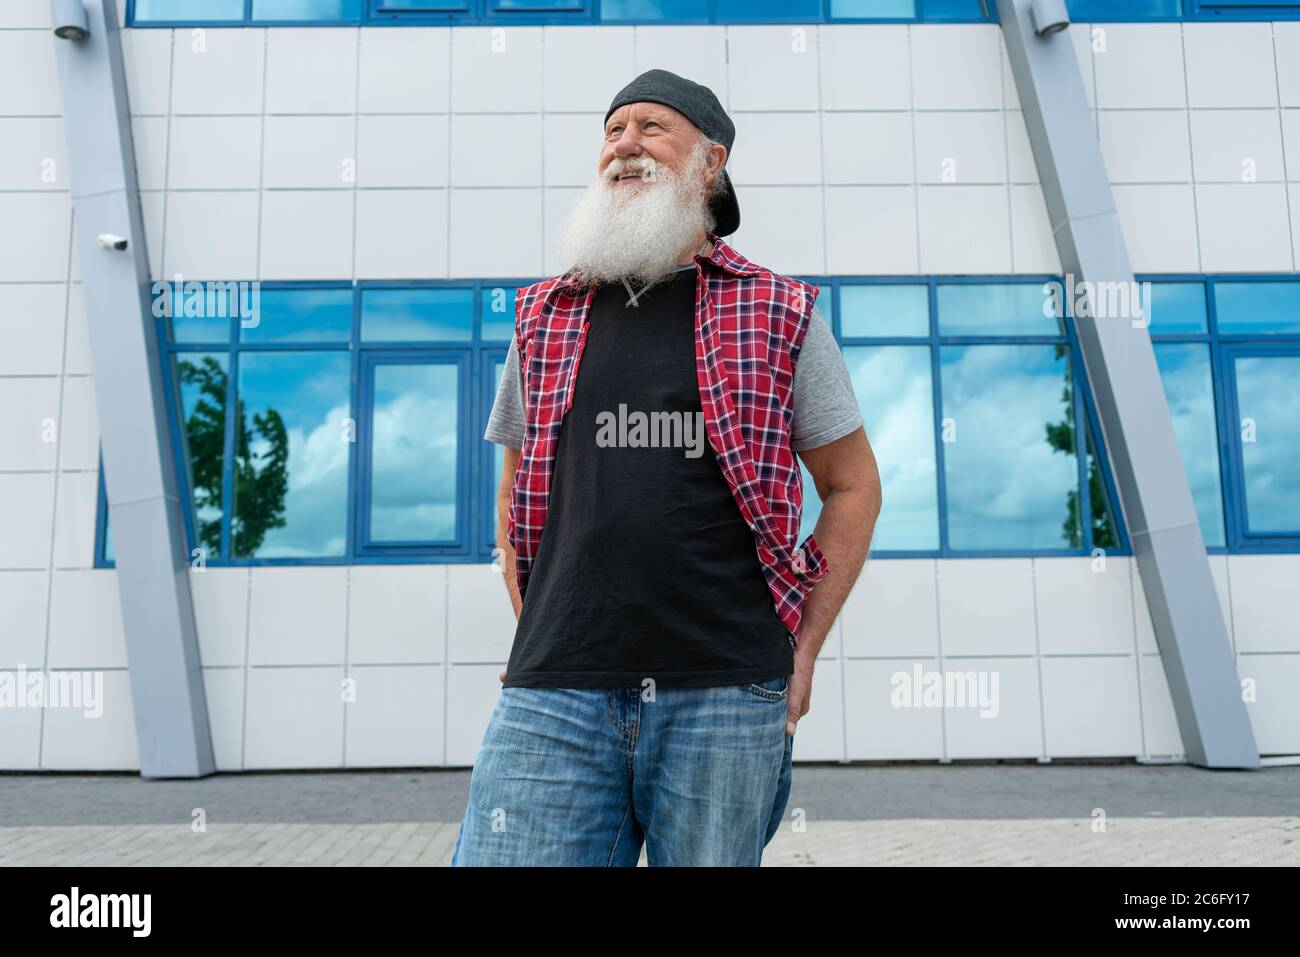 Experienced senior old man with beard on street posing and smiling, portrait Stock Photo